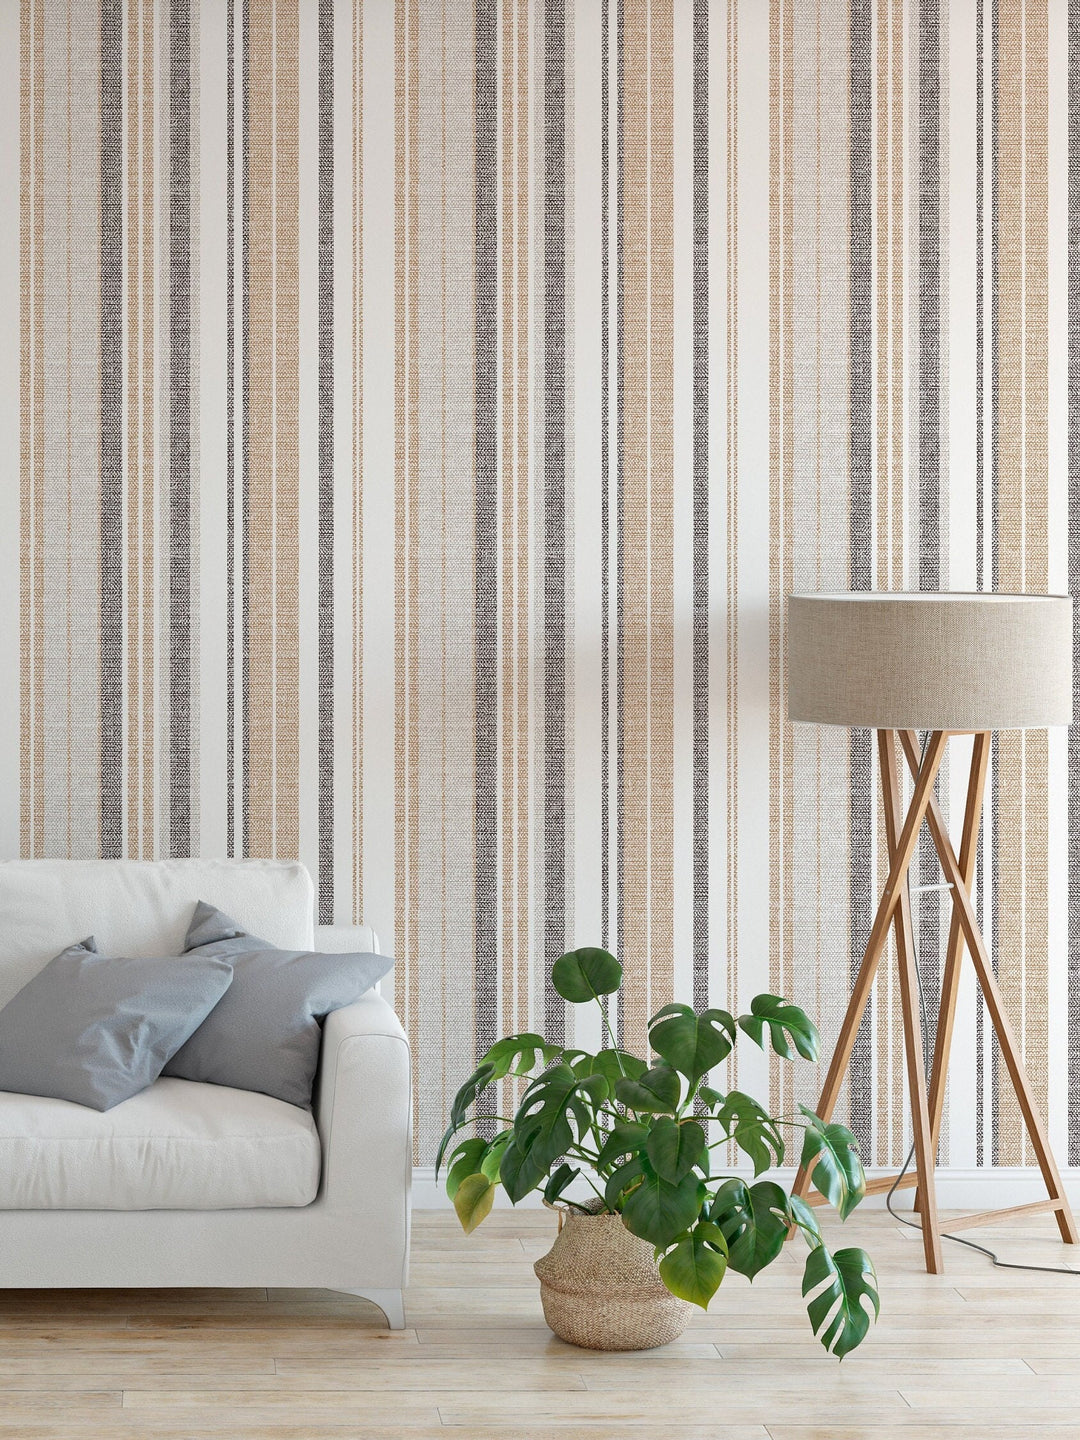 Multicolored linen wallpaper with stripes #63423